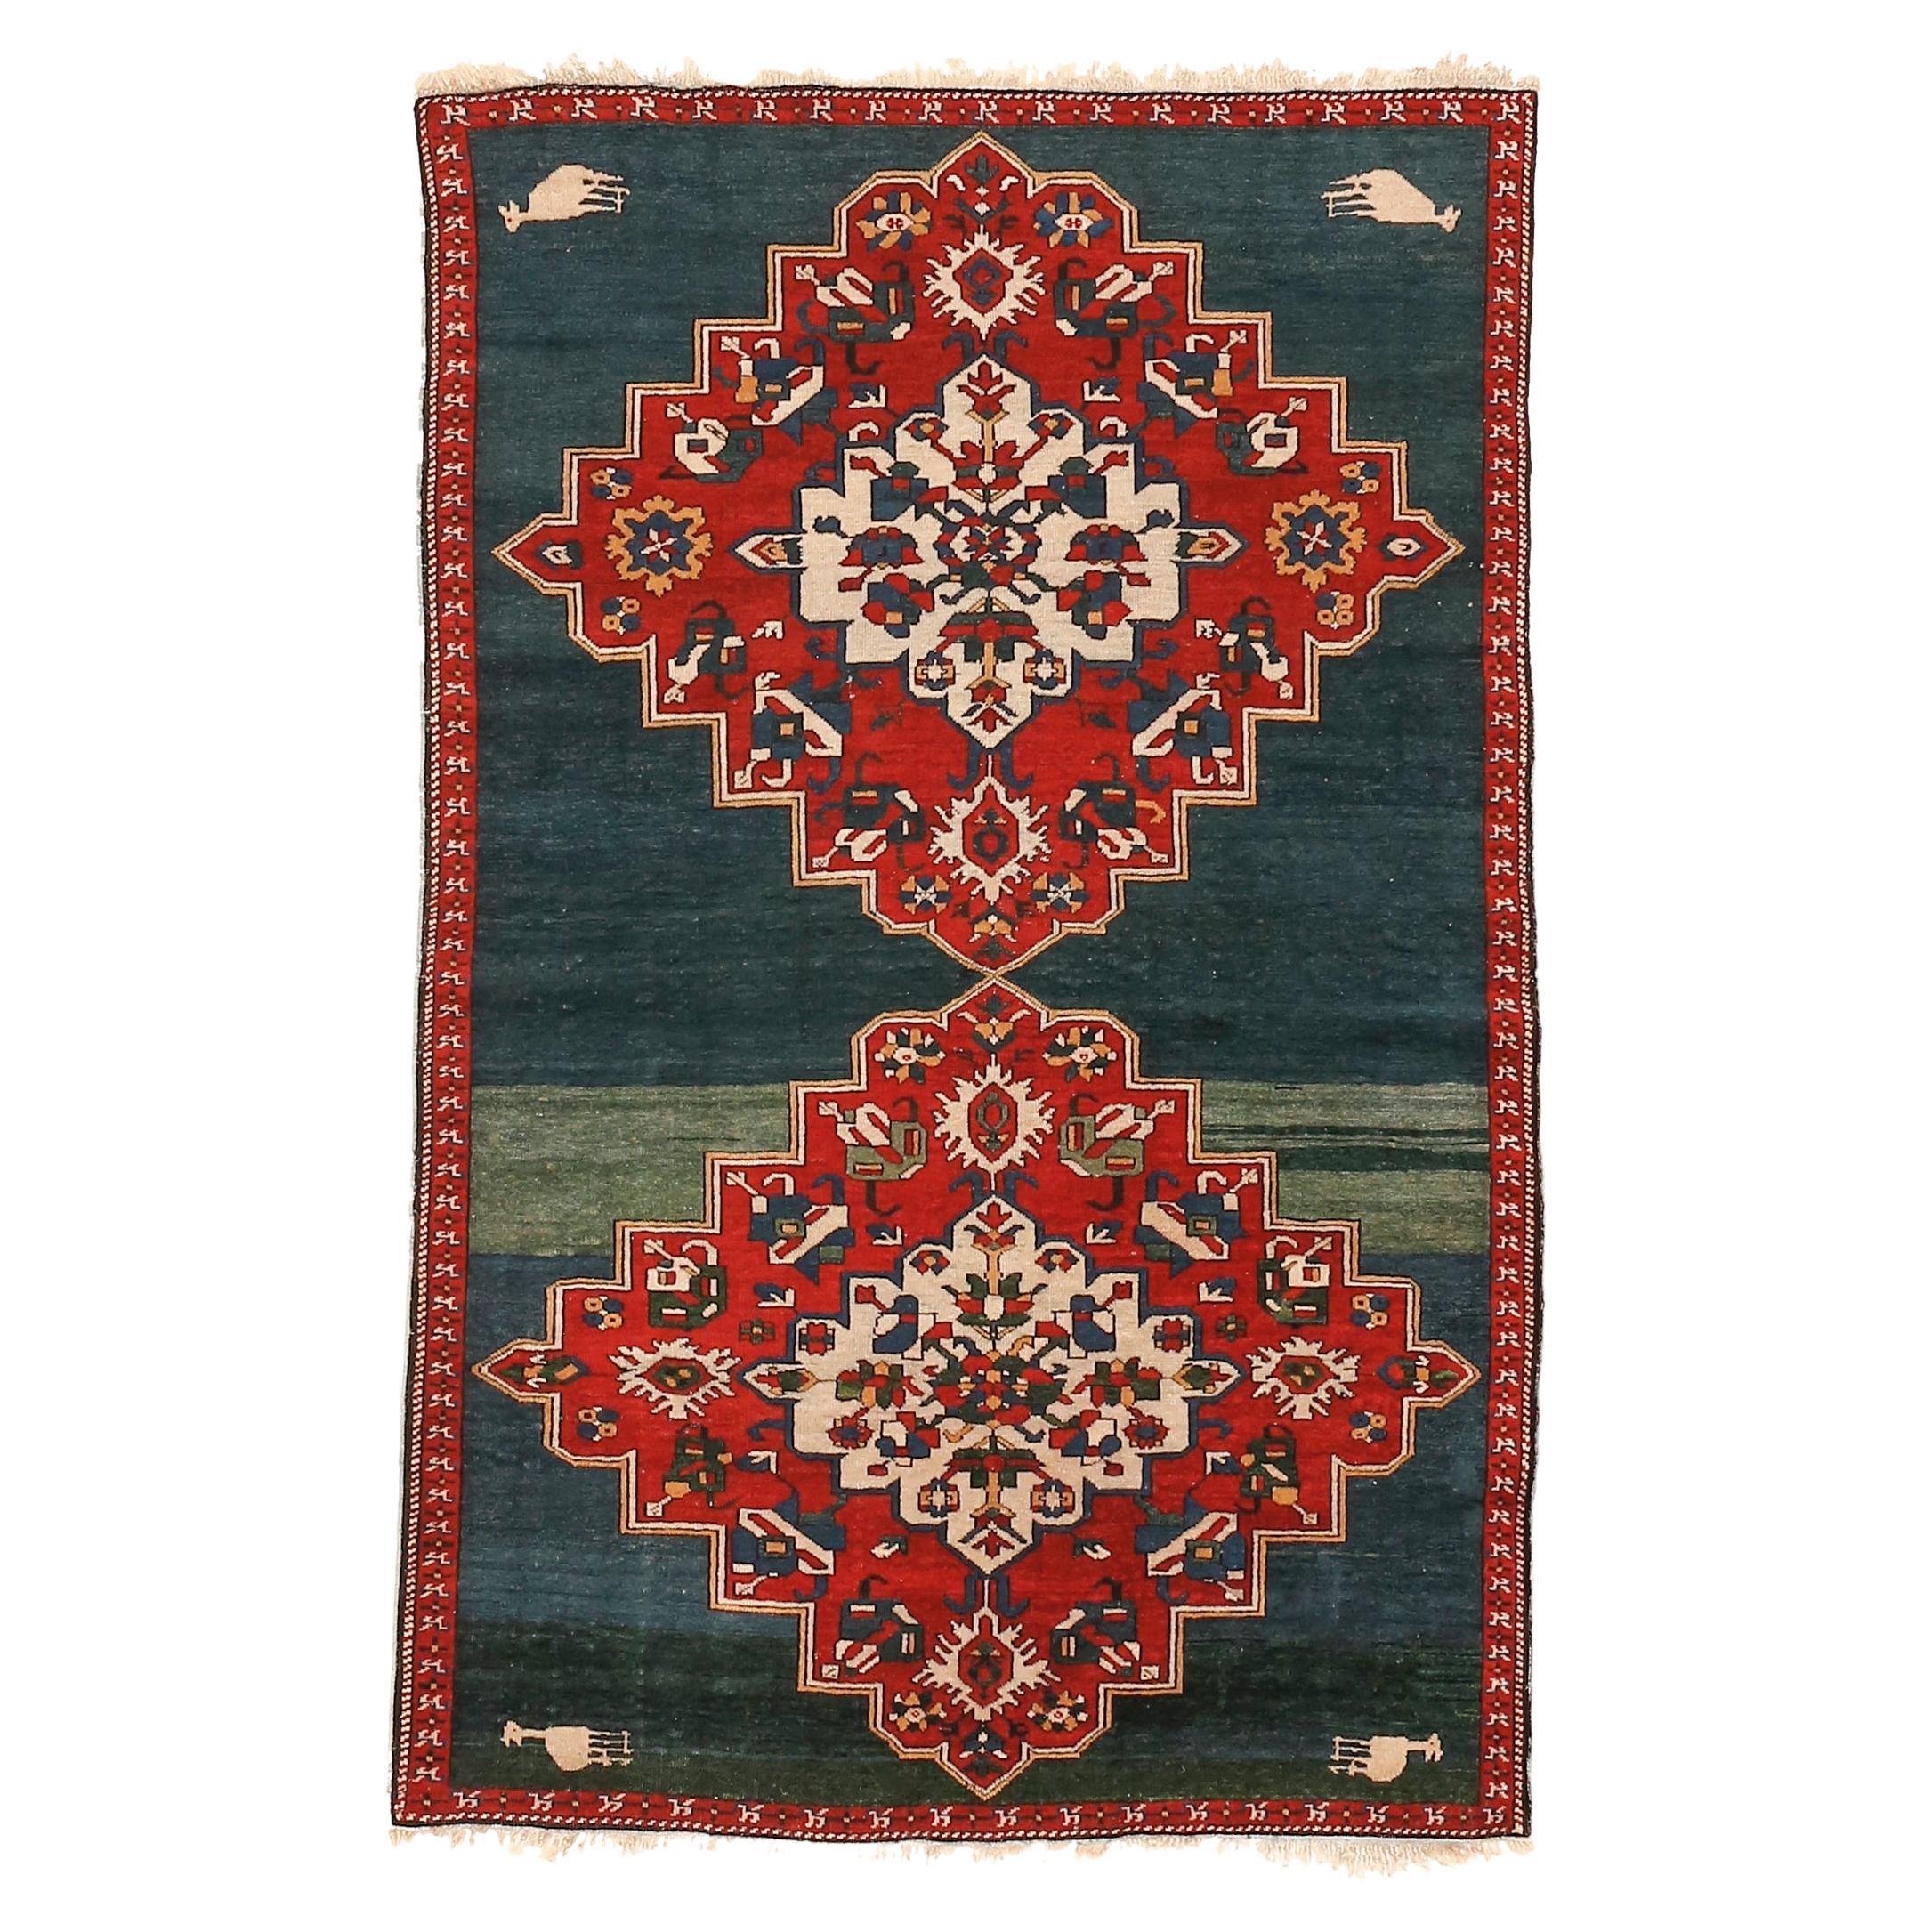 Fine Antique Caucasian Zeikhur Rug with Rare Teal Green Background